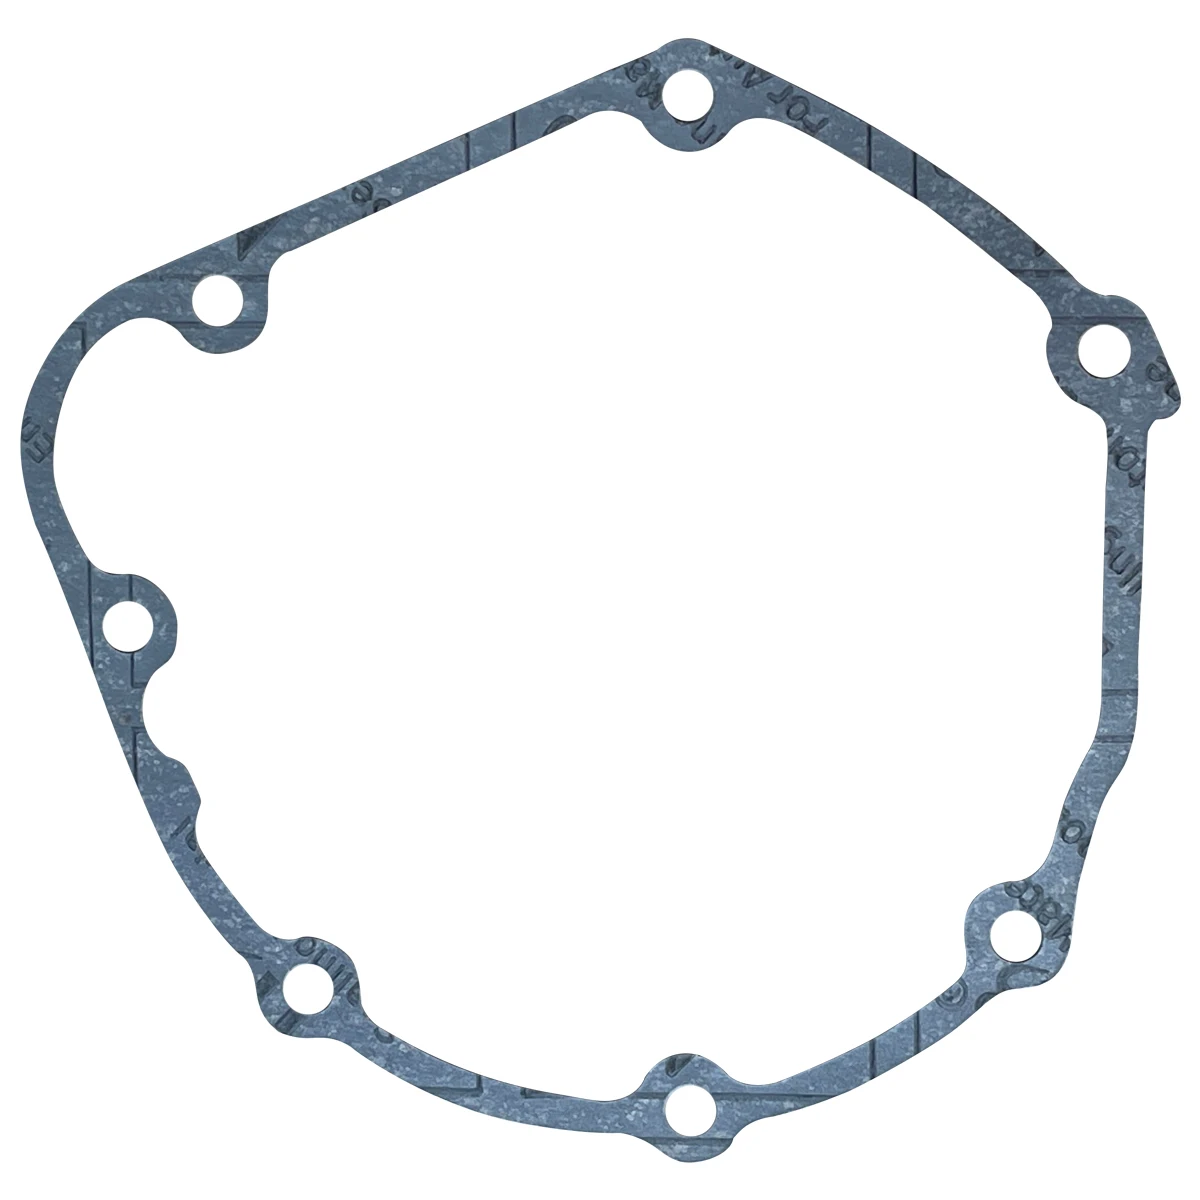 

Motorcycle Pulsing Cover Gasket For Kawasaki ZX1000 86-01 ZX1200 ZG1000 ZL1000 ZR1100 97-00 ZR1200 01-16 ZX900 86-93 03